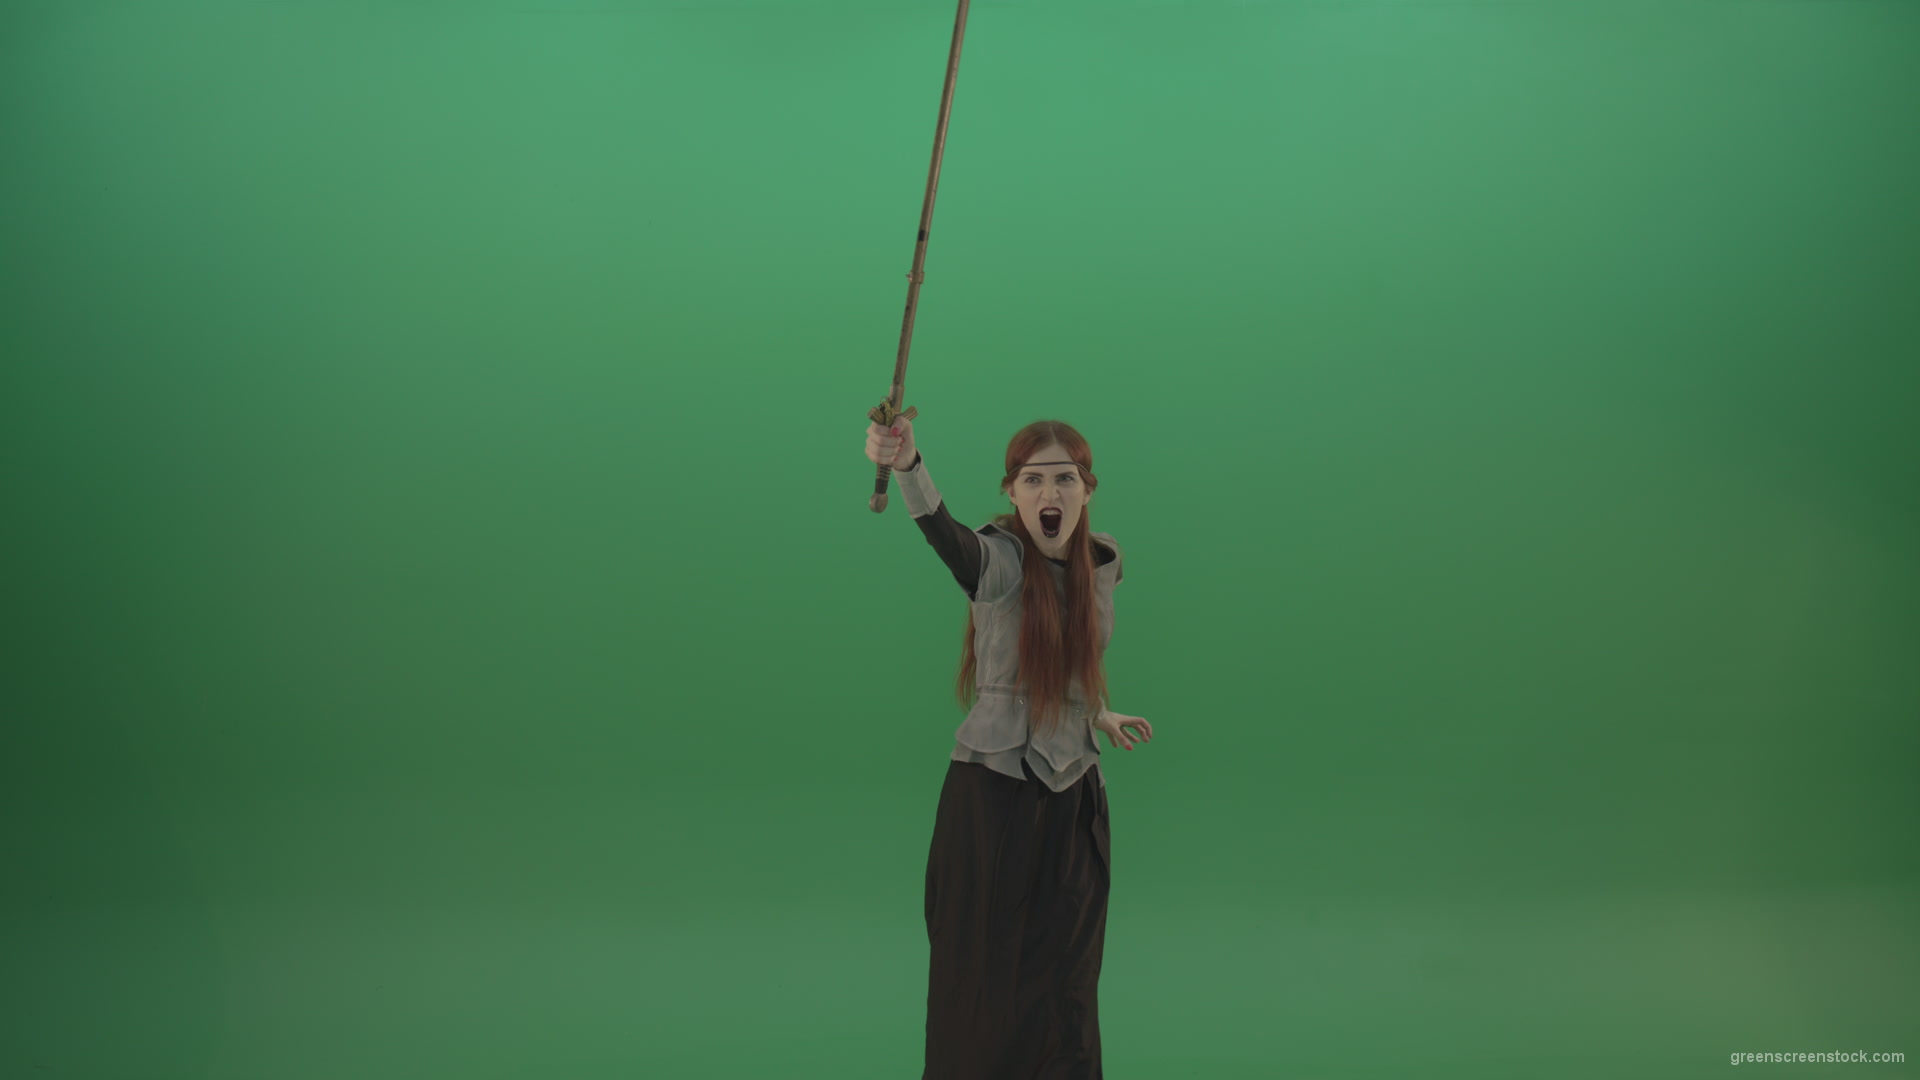 Girl-shouts-her-foes-on-an-offensive-raising-a-sword-up-on-a-green-background_006 Green Screen Stock